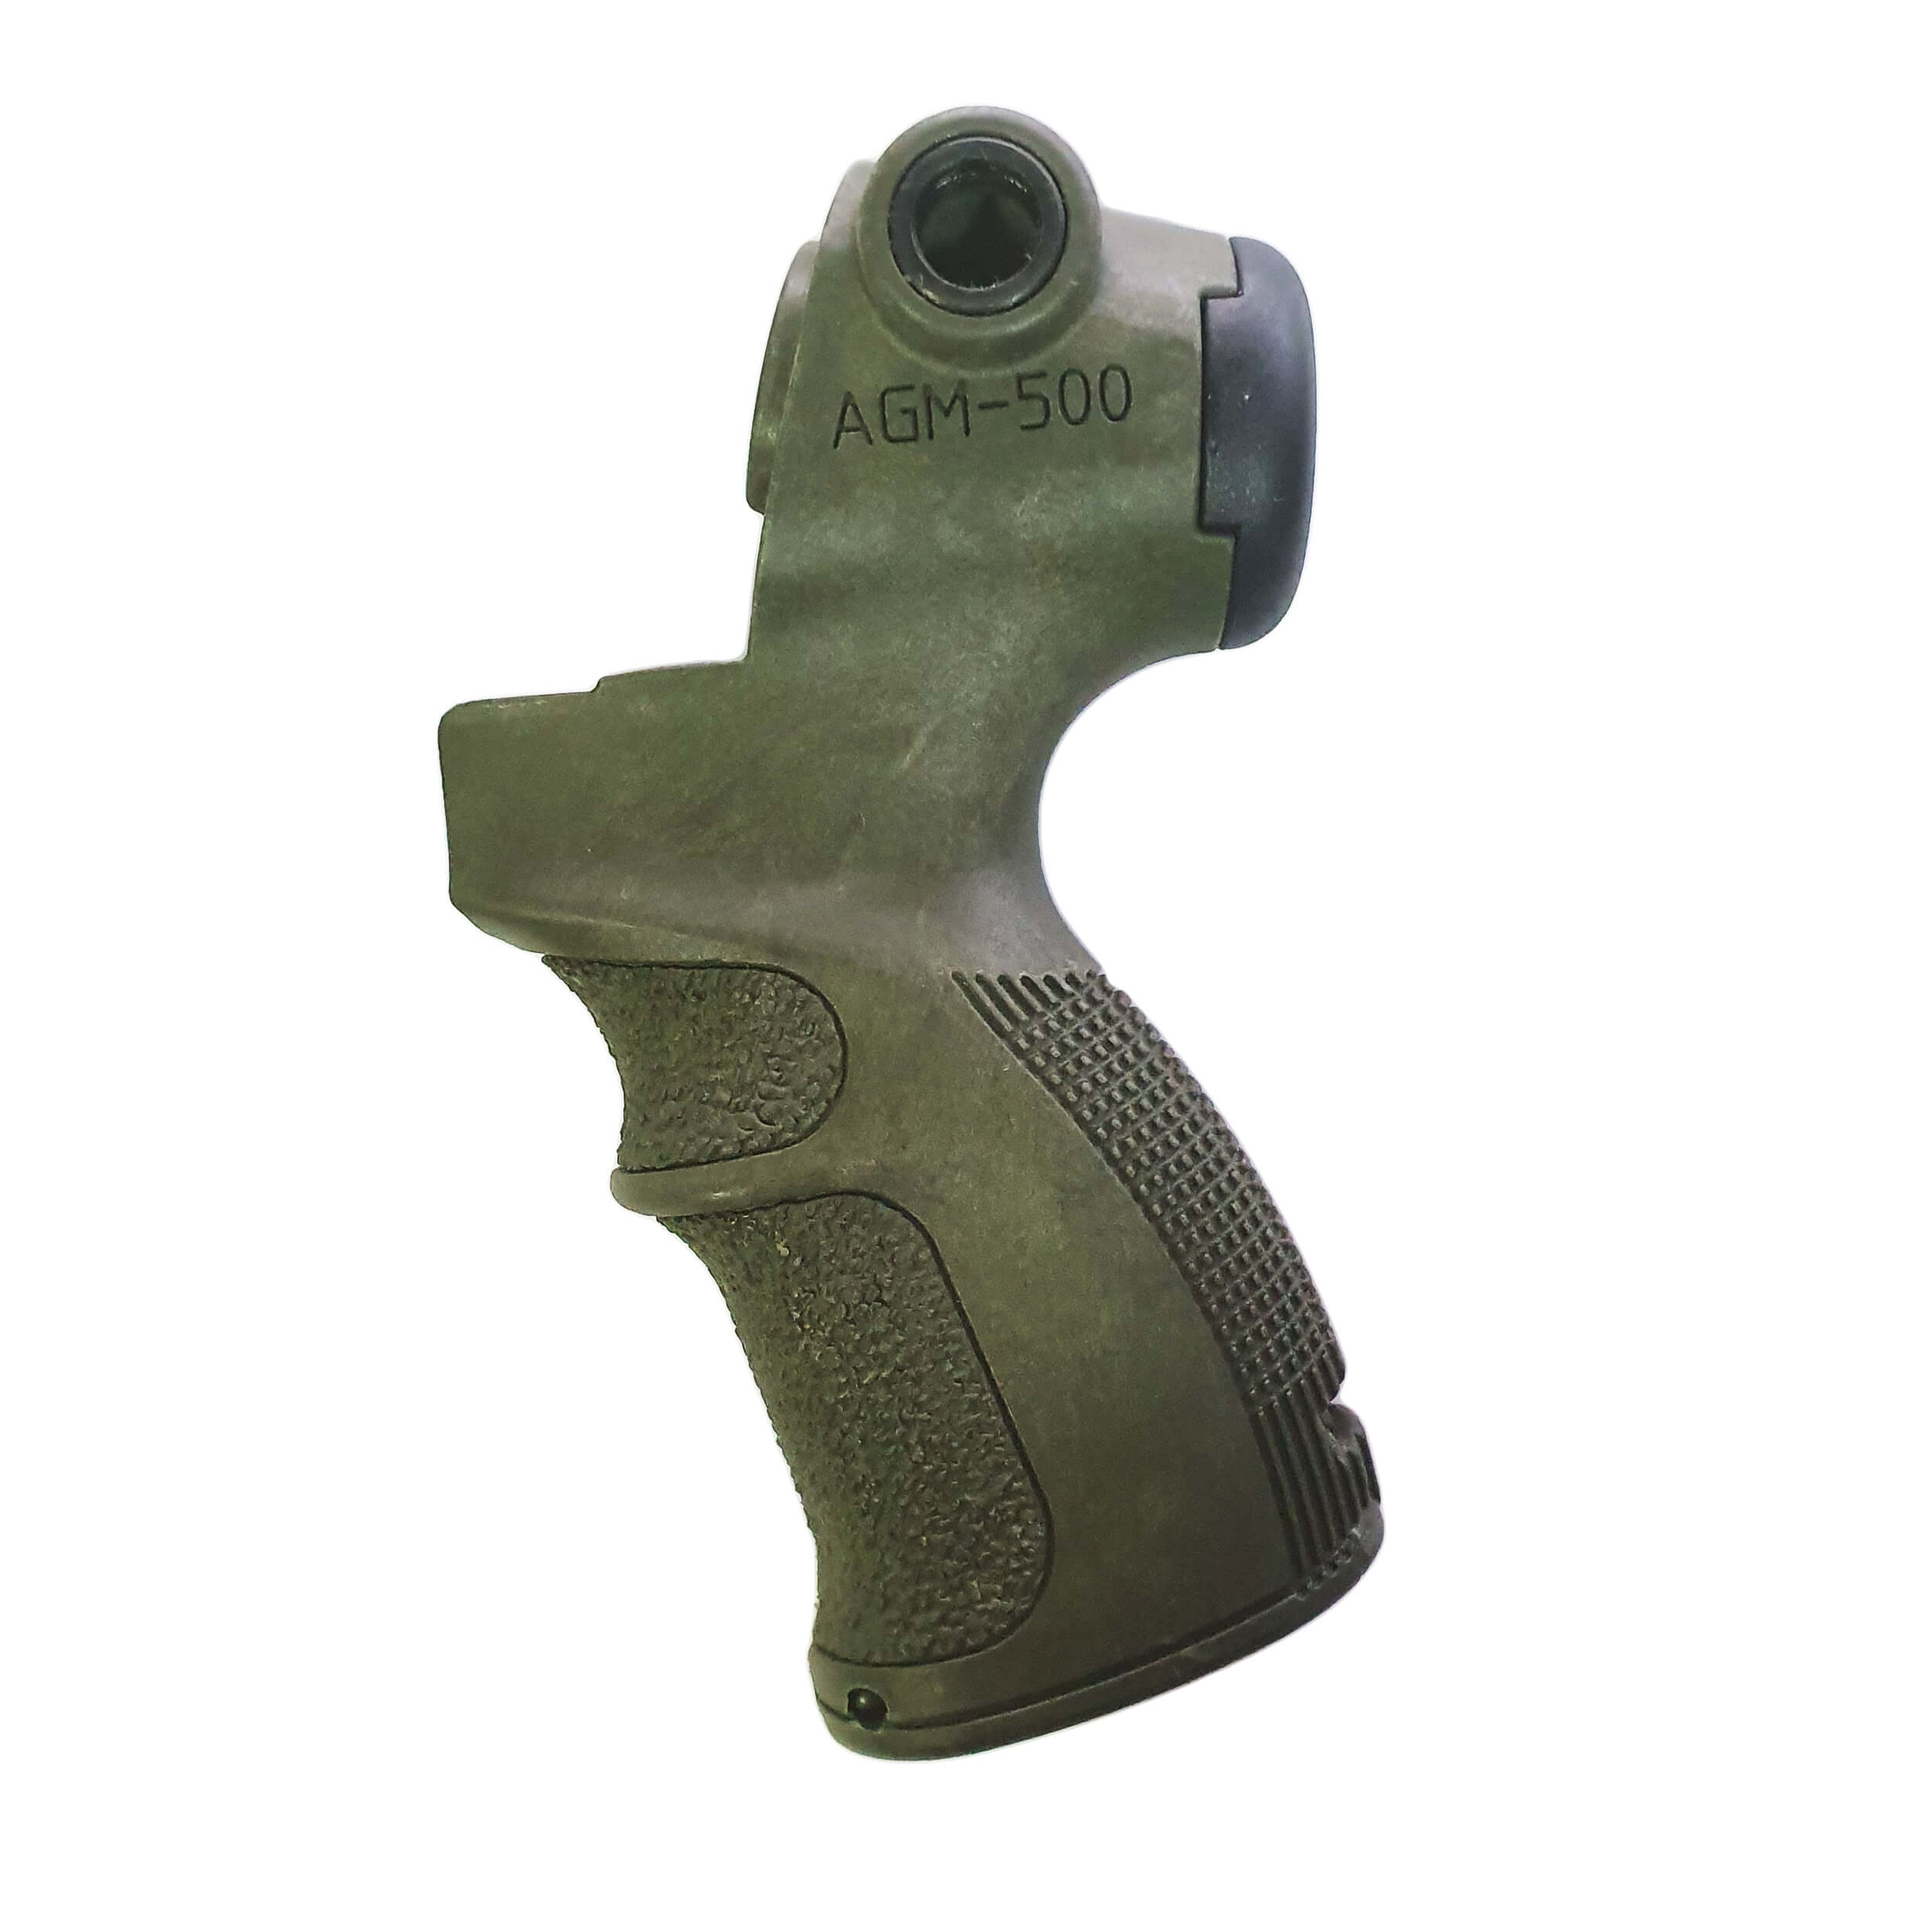 AGM-500 Pistol Grip for Mossberg 500 / 590 with black back cap